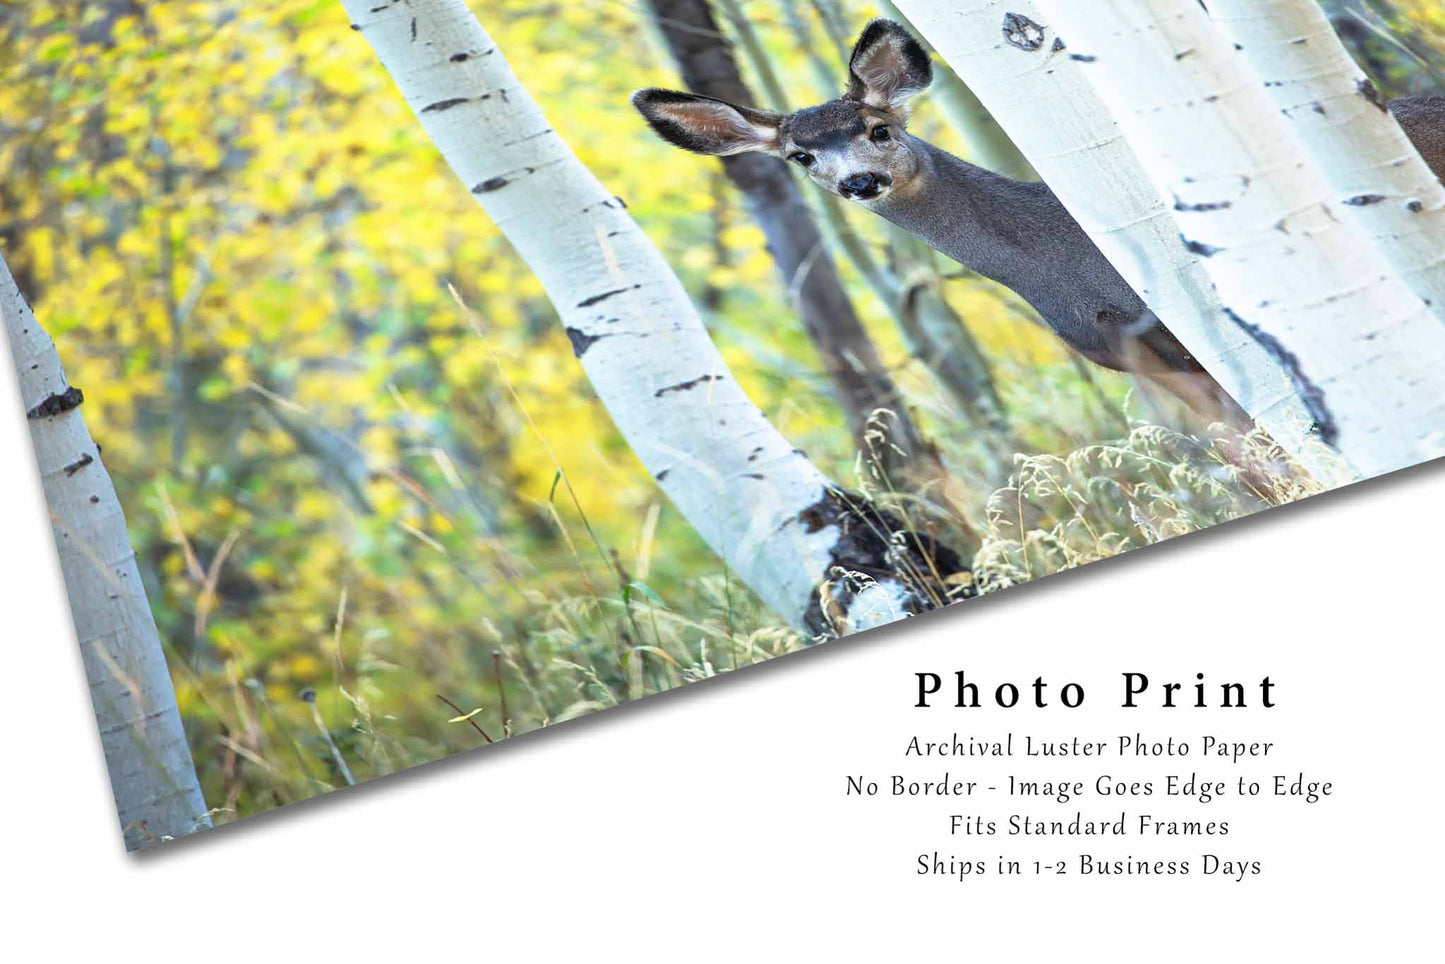 Wildlife Photo Print | Mule Deer and Aspen Trees Picture | Colorado Wall Art | Animal Photography | Nature Decor